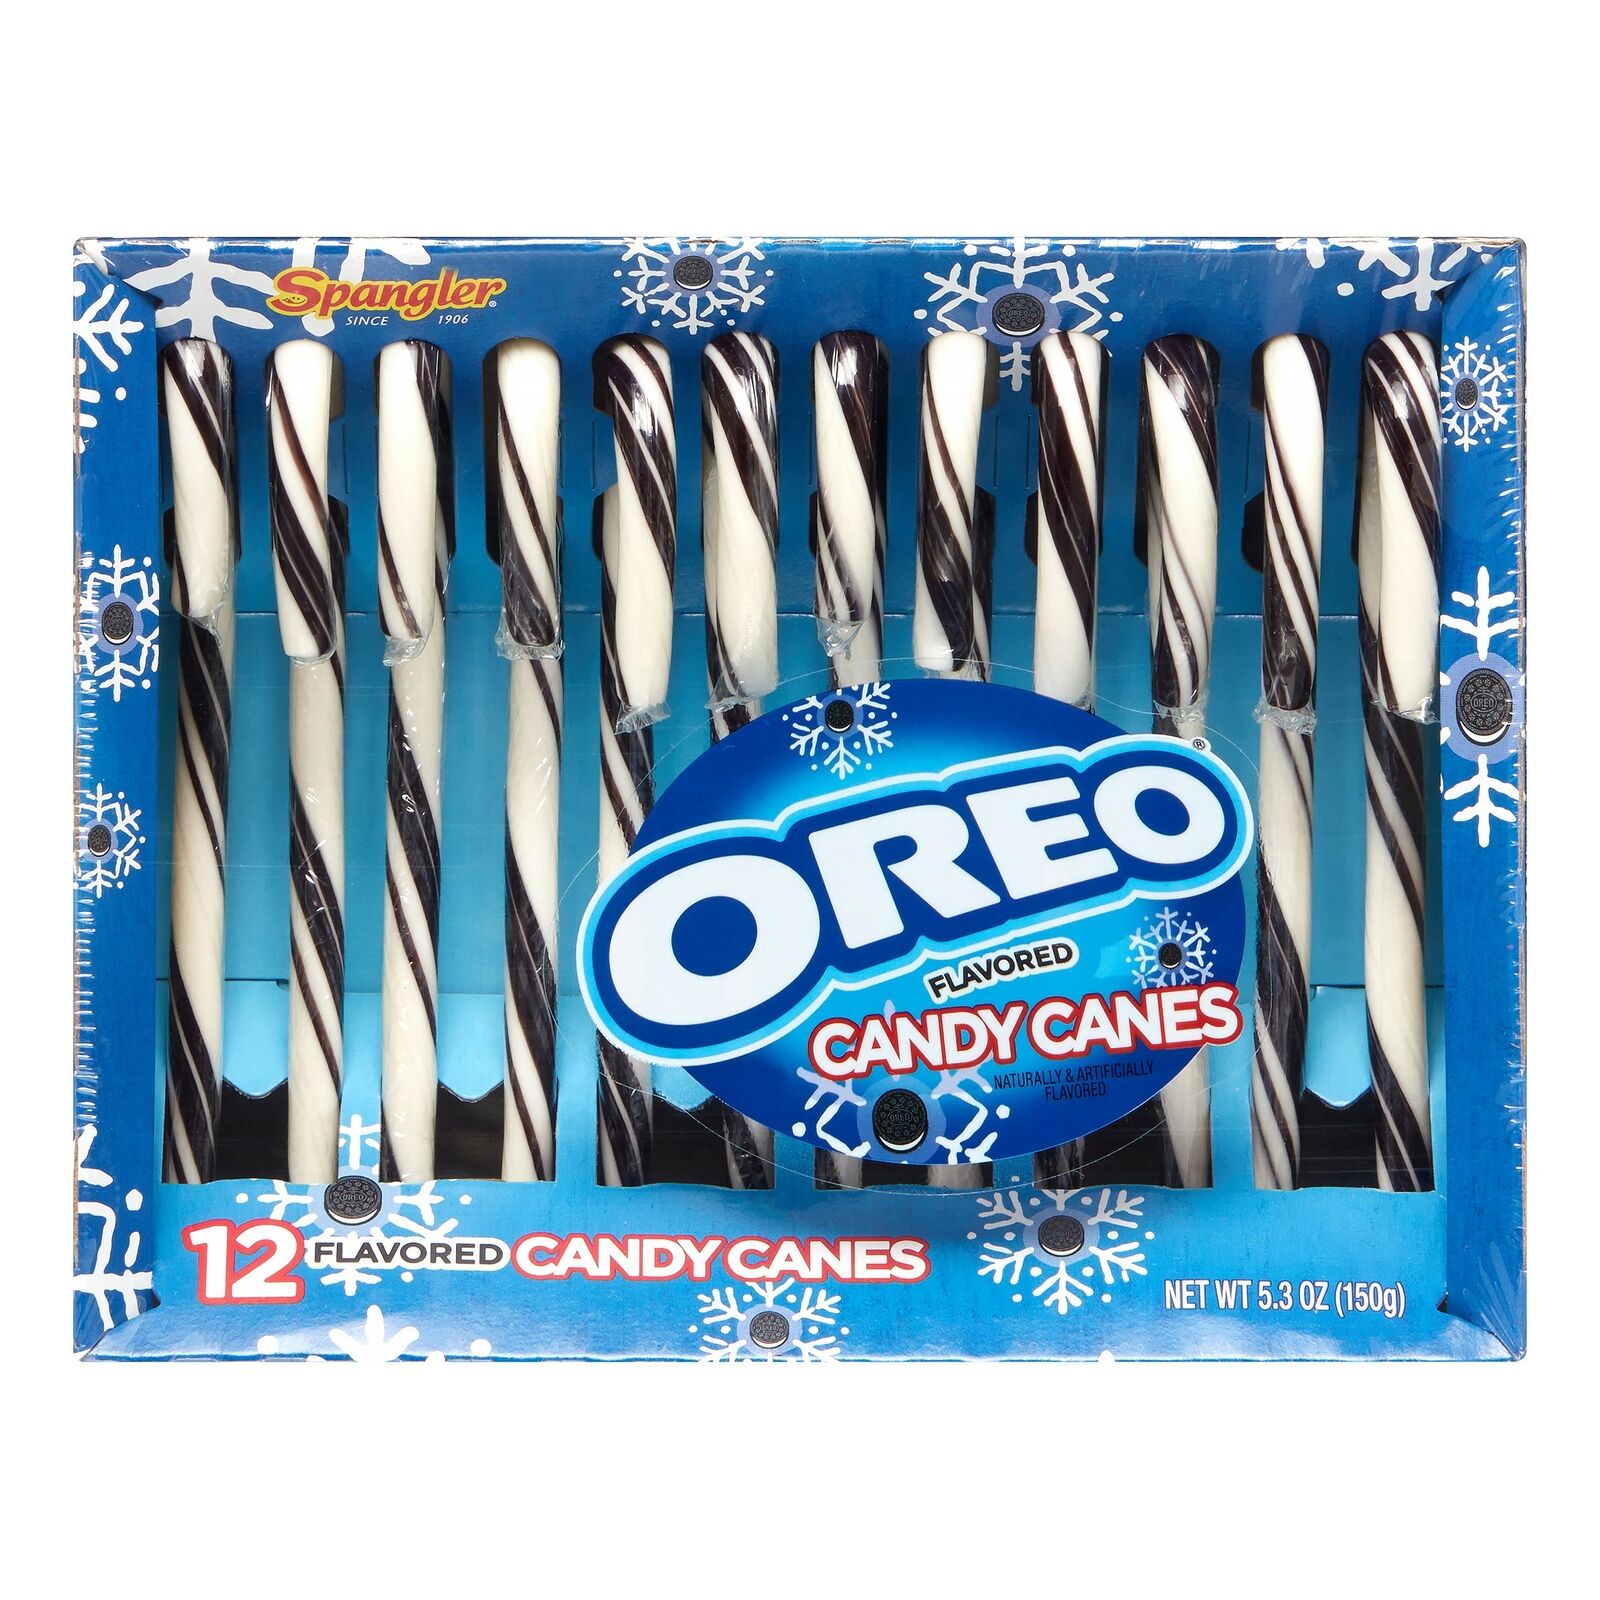 Oreo Flavored Cookies & Cream Candy Canes, 5.3 Oz., 12 Count